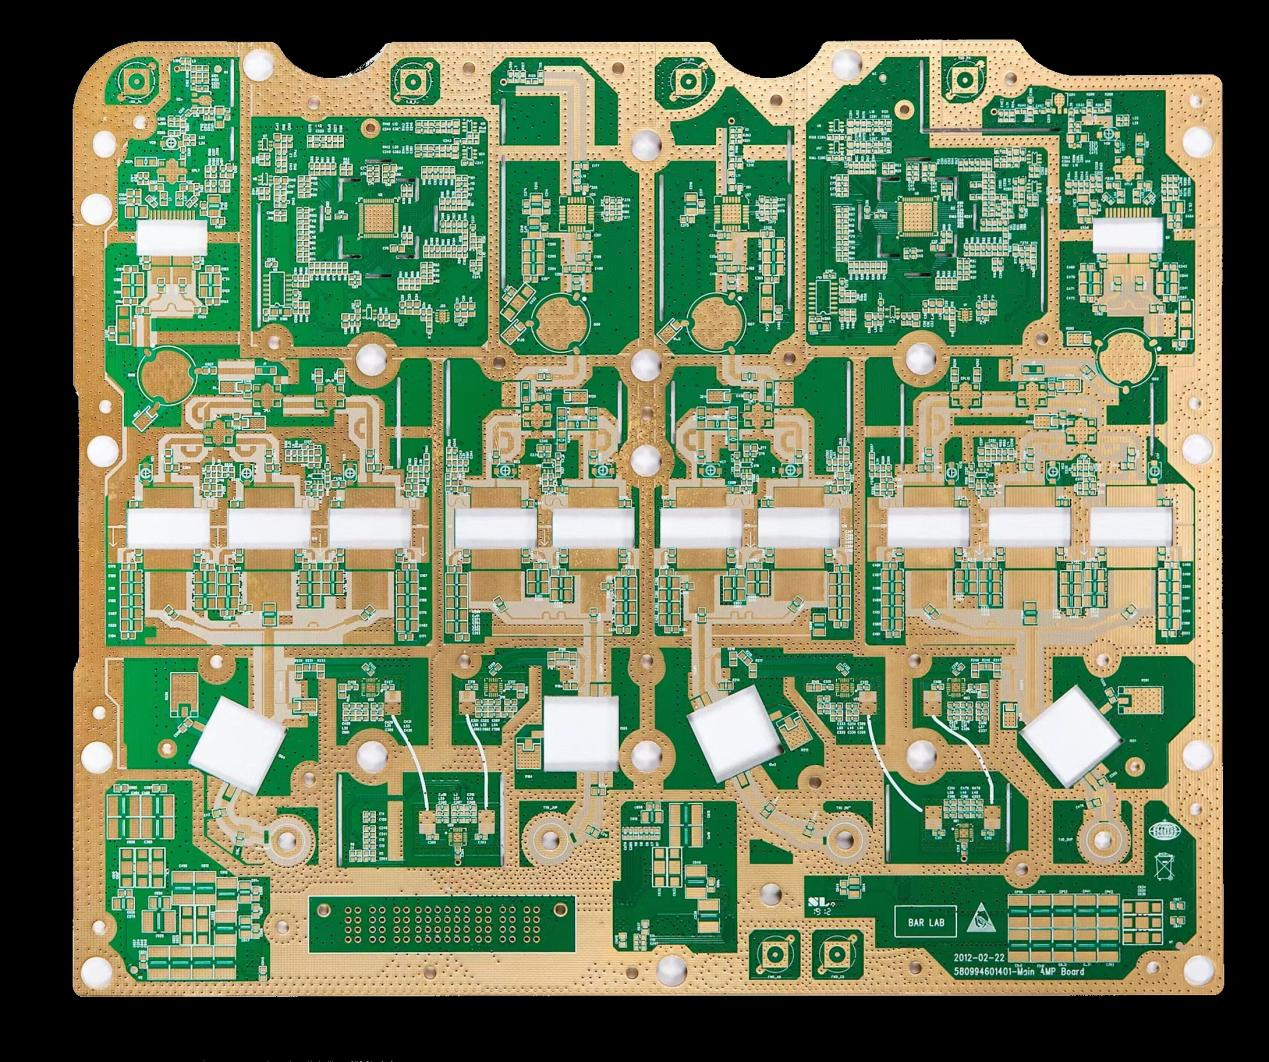 Creator Works has achieved "acceleration" in PCB industry